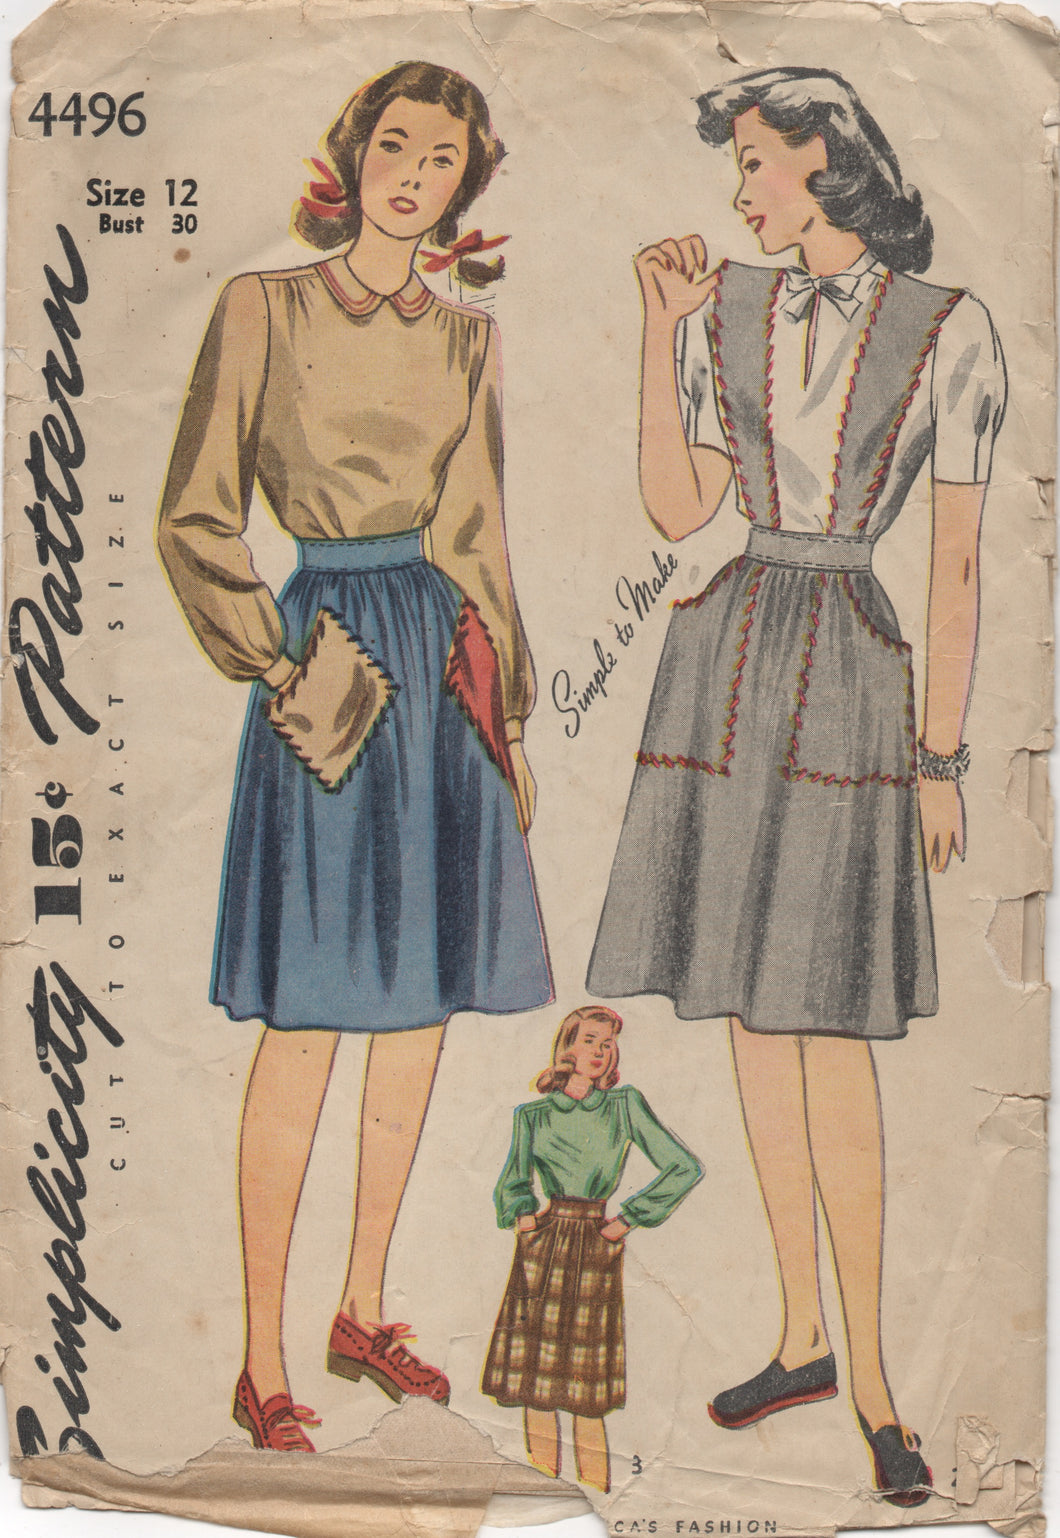 1940’s Simplicity Blouse, Jumper or Skirt with Large Pockets - Bust 30